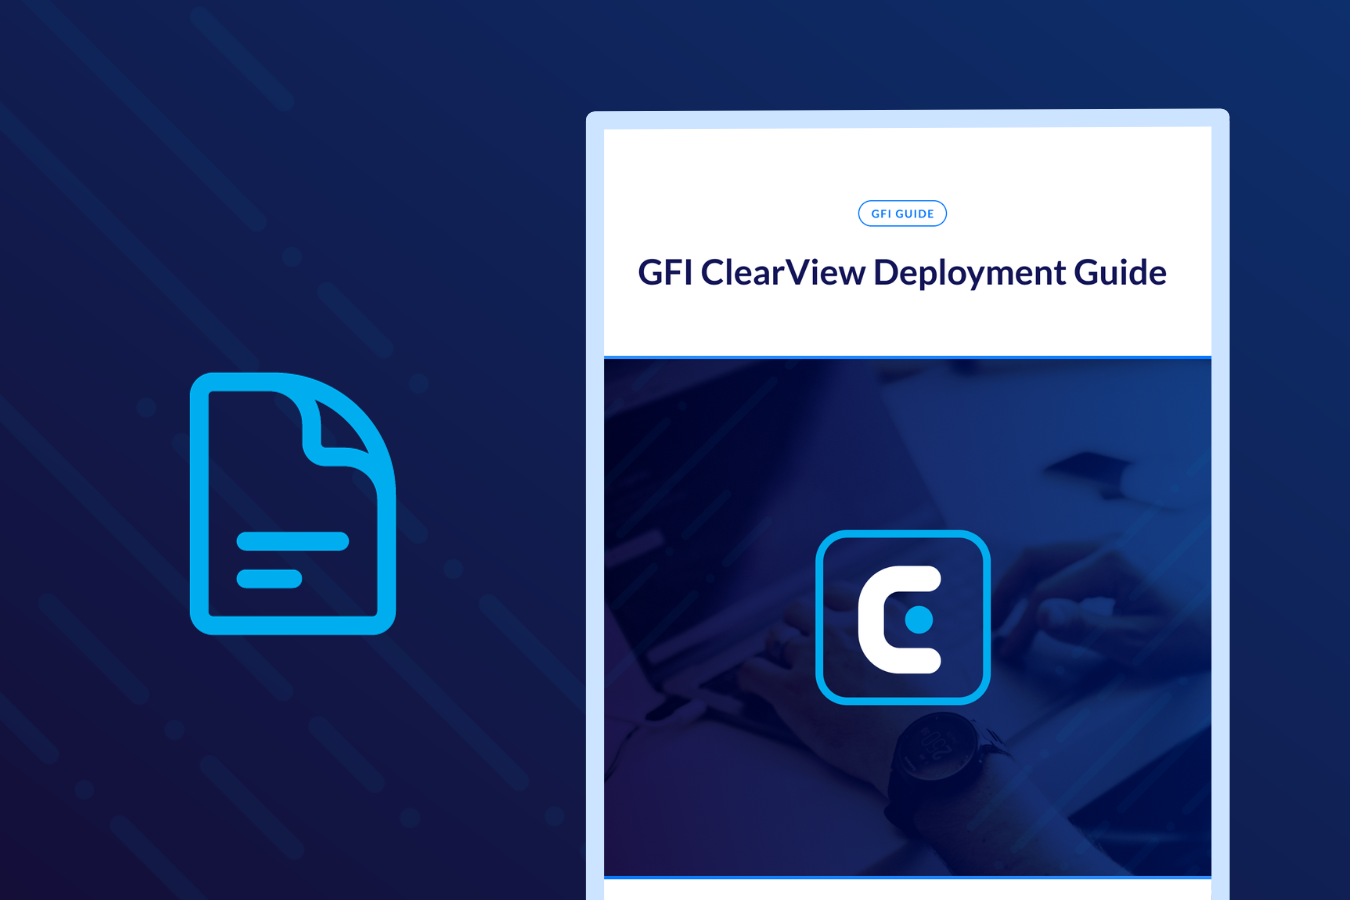 GFI ClearView Deployment Guide